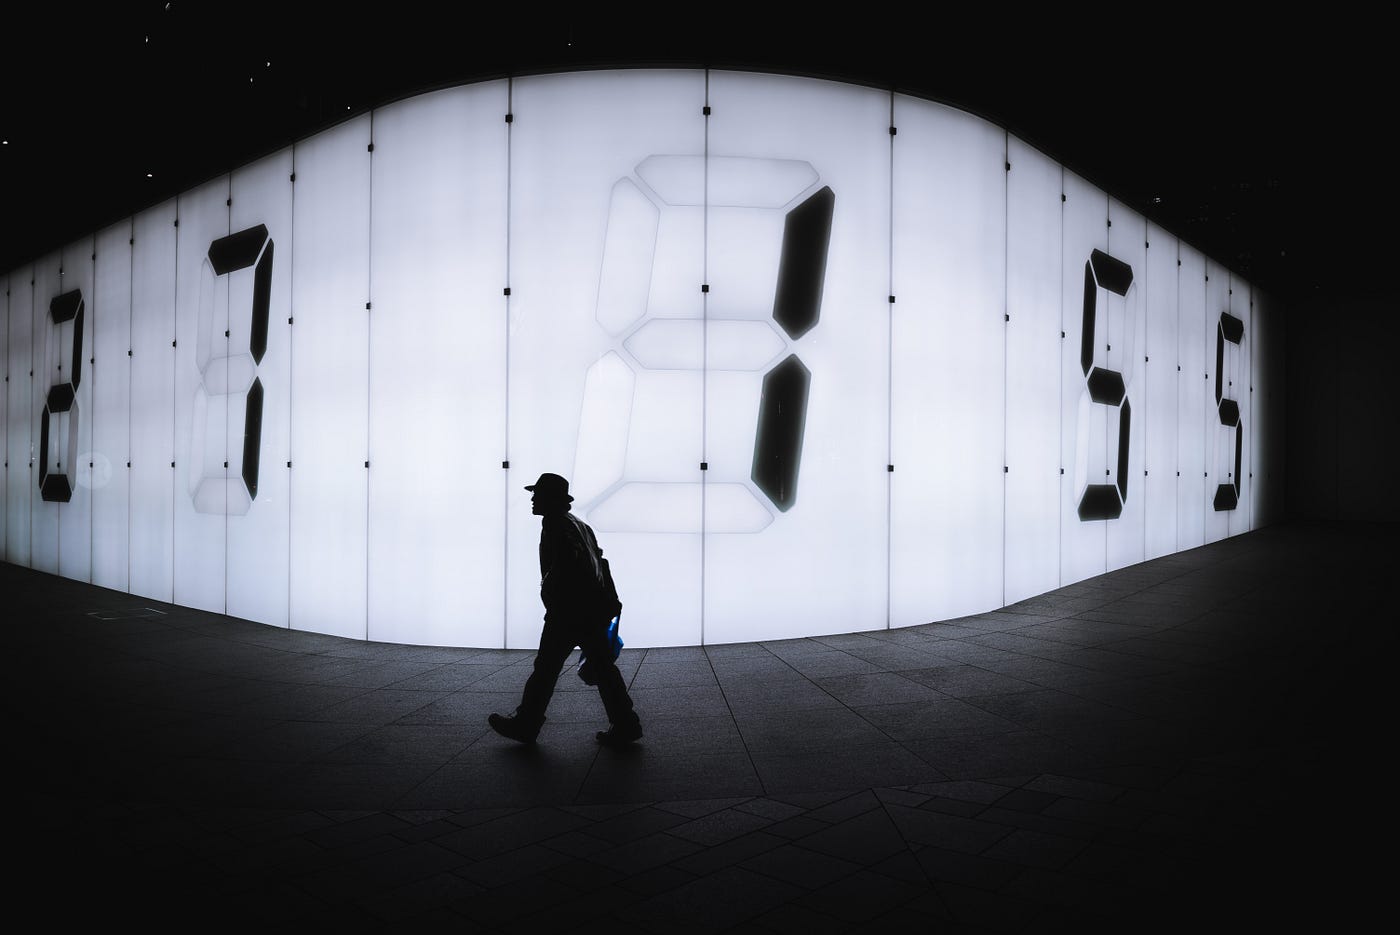 A black and white image of a man (in silhouette) walking from right to left. The man is in the middle of the image, and behind him is a wall of square panels with numbers on some of them.